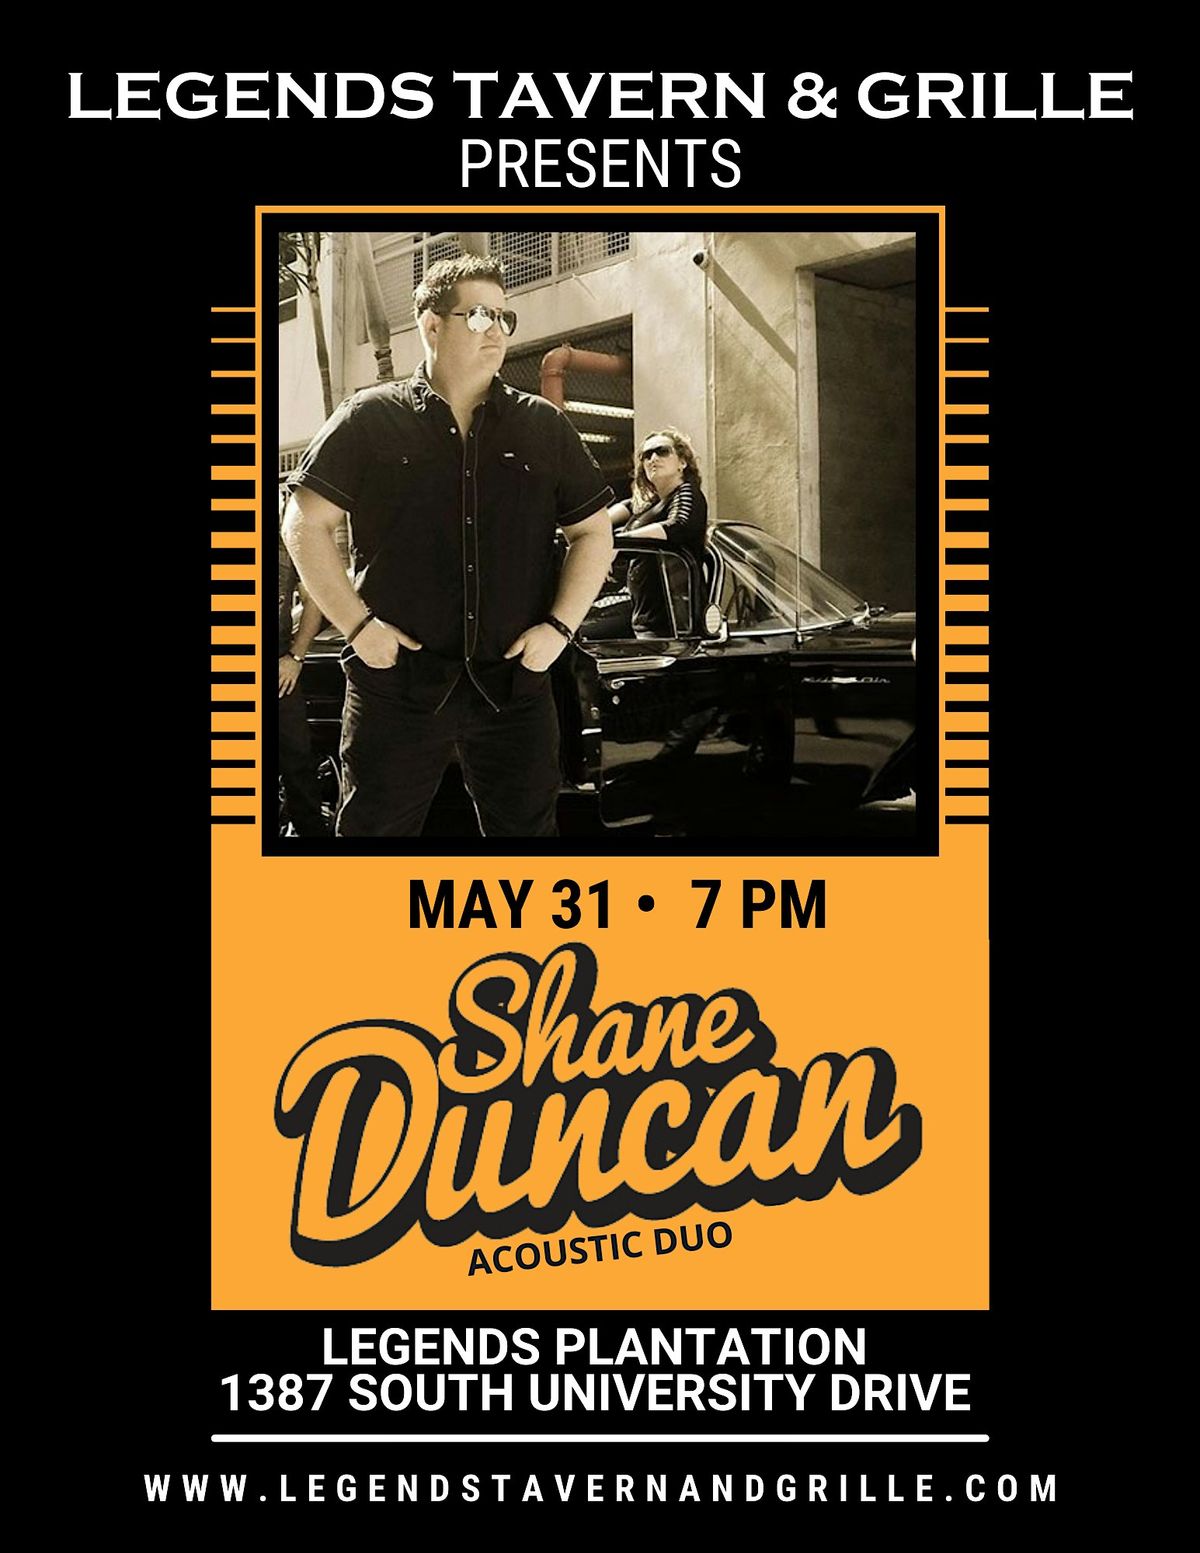 Live Performance by Shane Duncan Acoustic Duo at Legends Tavern & Grille Plantation